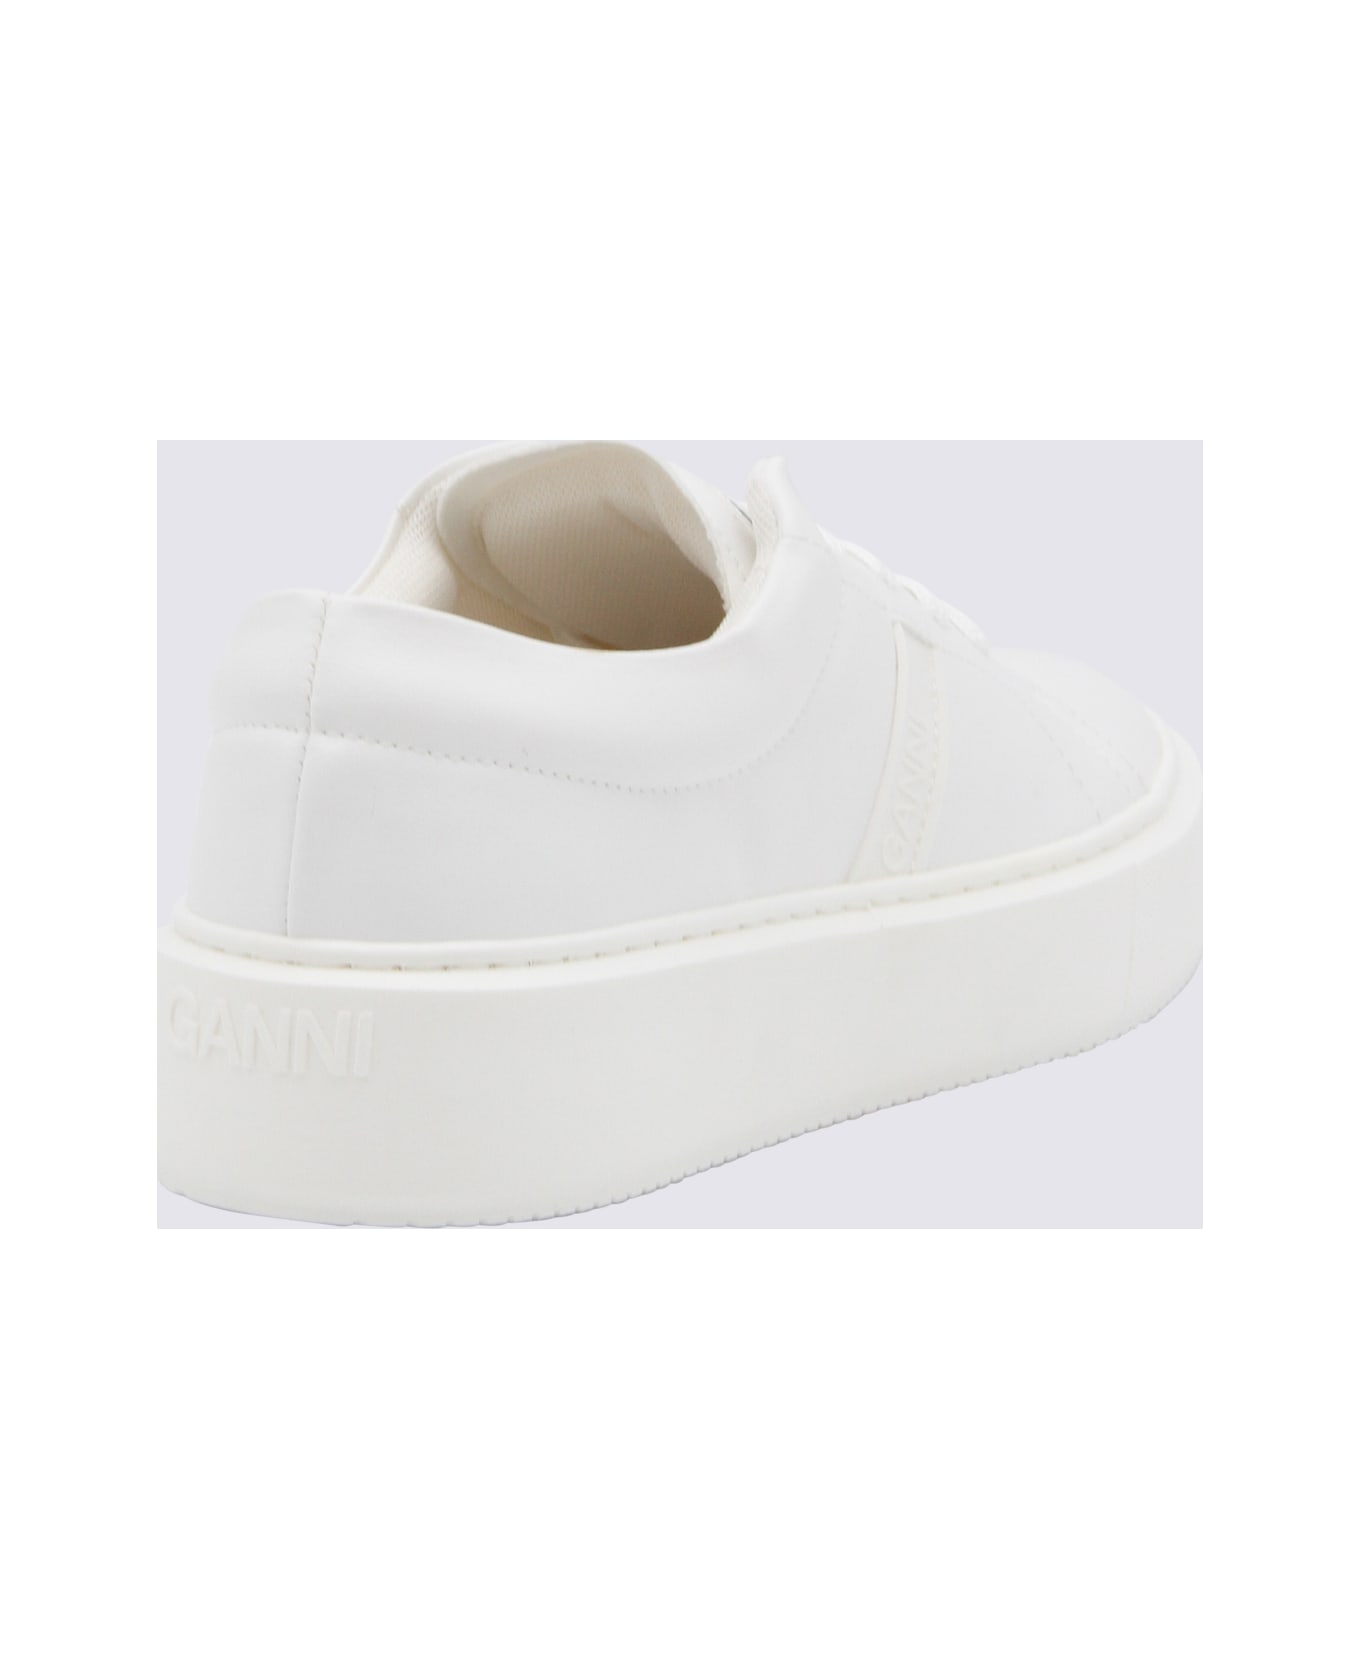 Ganni White Faux Leather Sporty Sneakers - Egret ウェッジシューズ